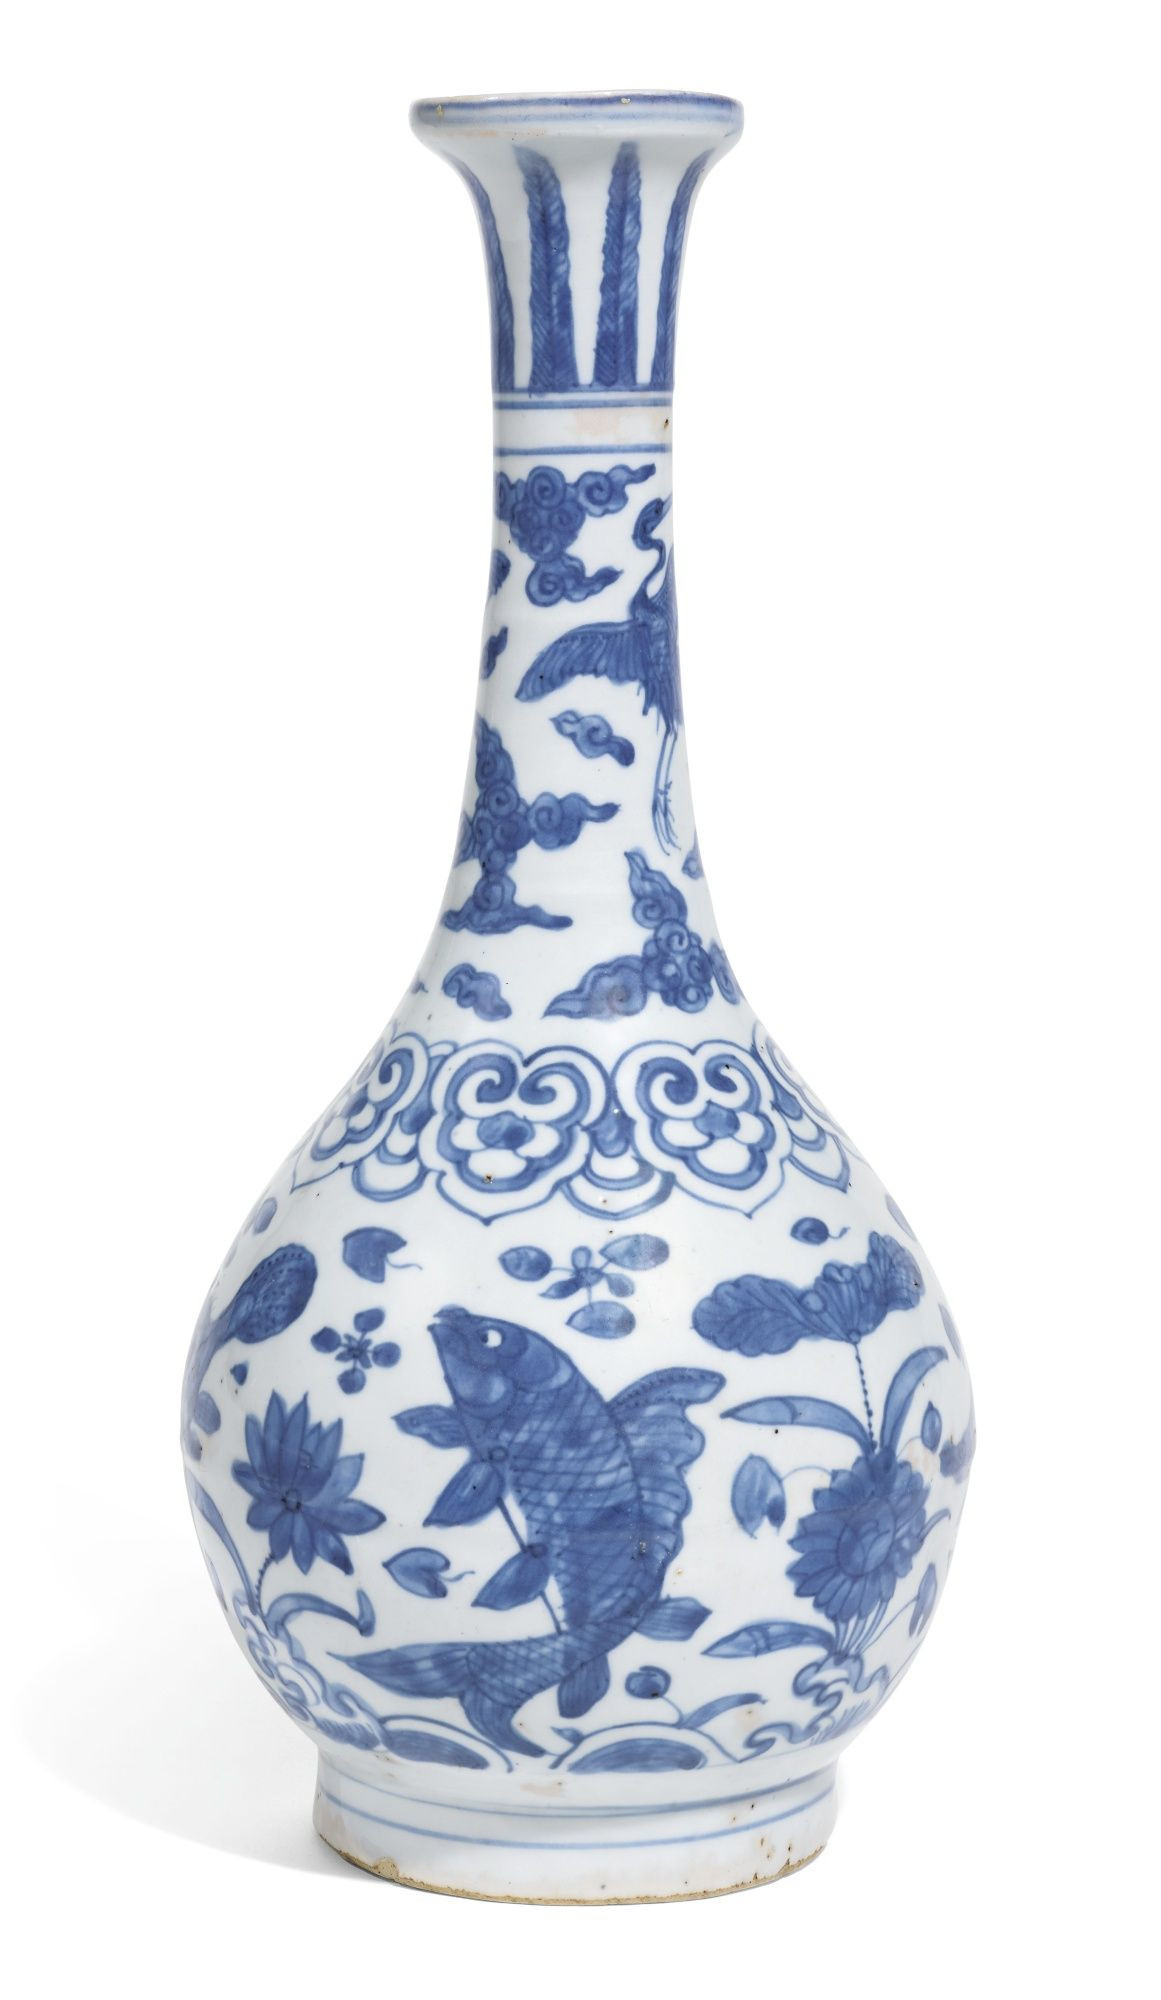 blue and white chinese vases cheap of a blue and white bottle vase ming dynasty jiajing wanli period with a blue and white bottle vase ming dynasty jiajing wanli period